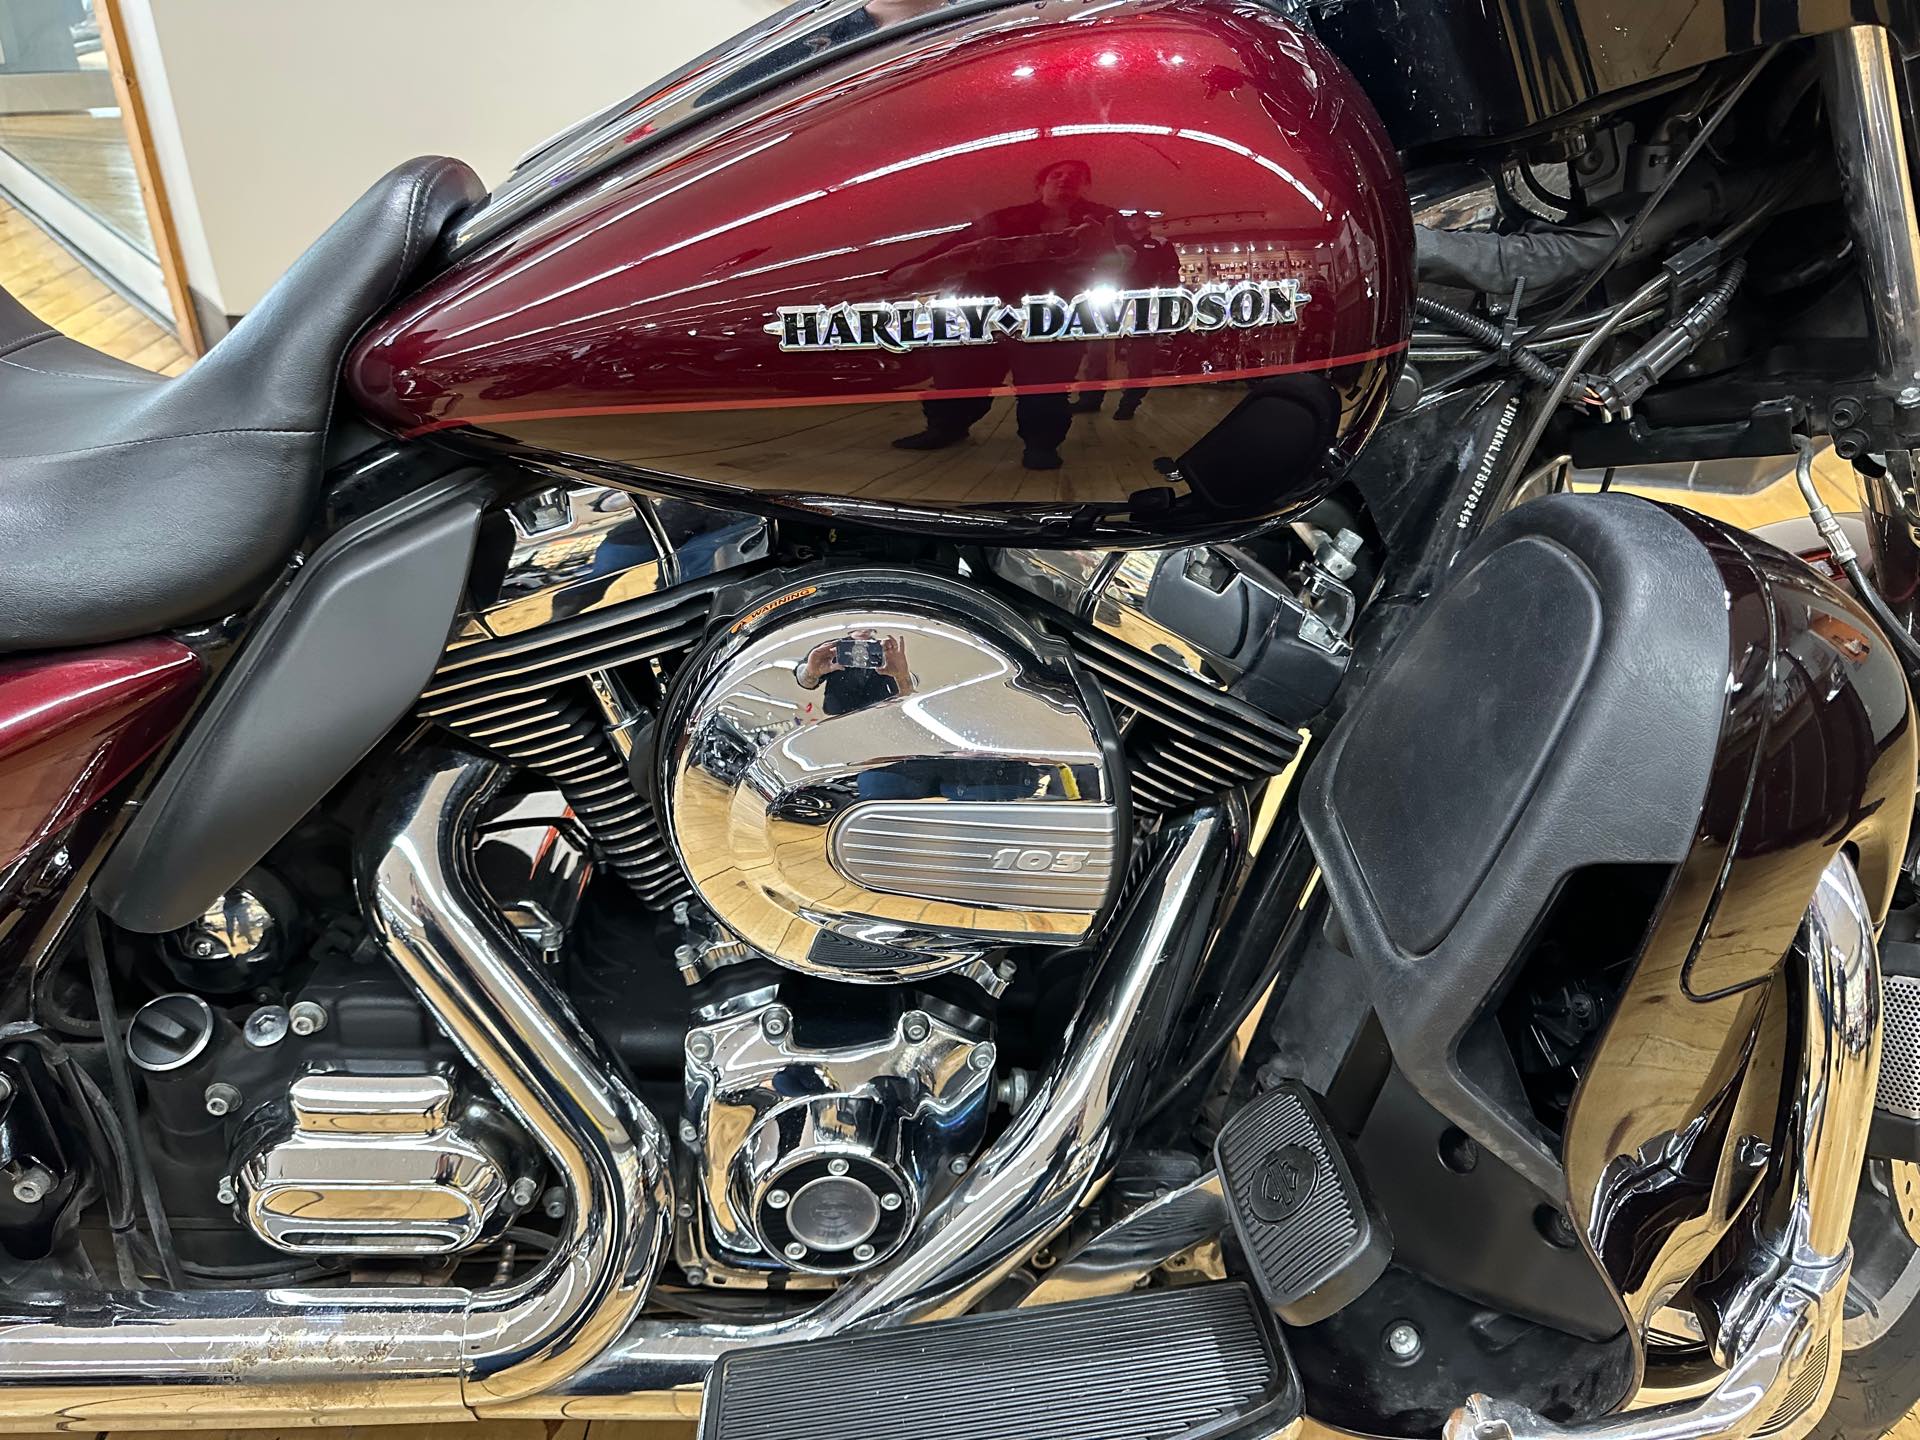 2015 Harley-Davidson Electra Glide Ultra Limited Low at Zips 45th Parallel Harley-Davidson